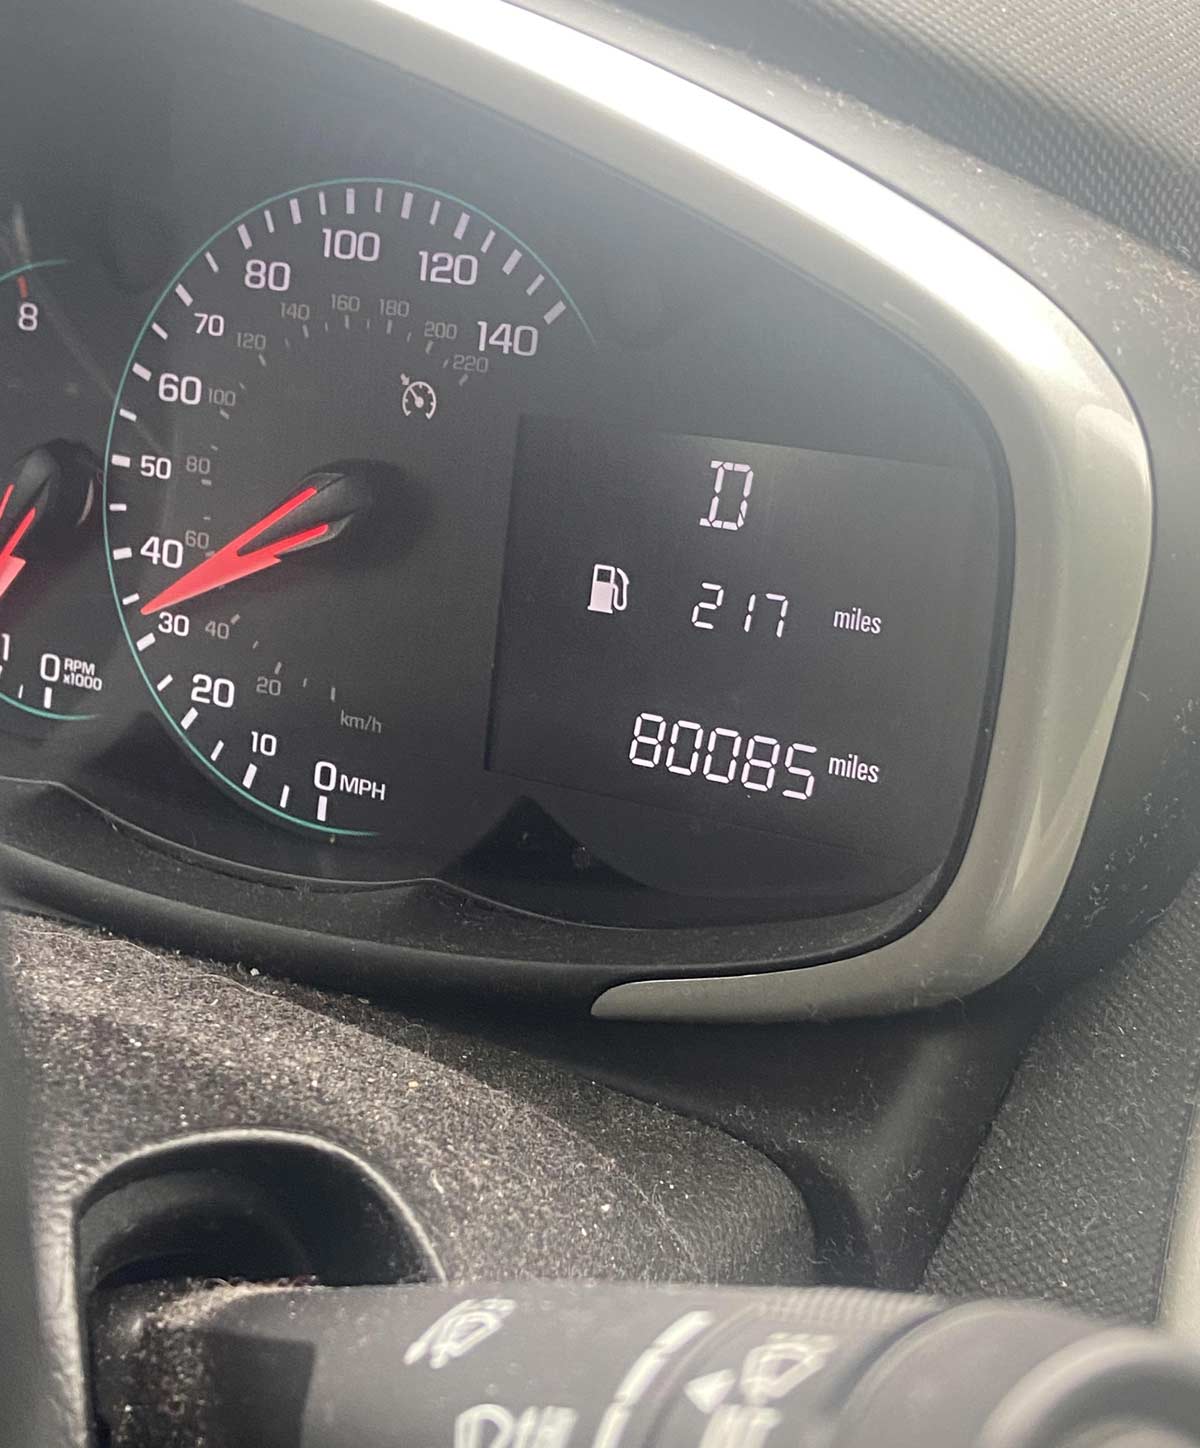 My wife was driving and just said “BOOBS”